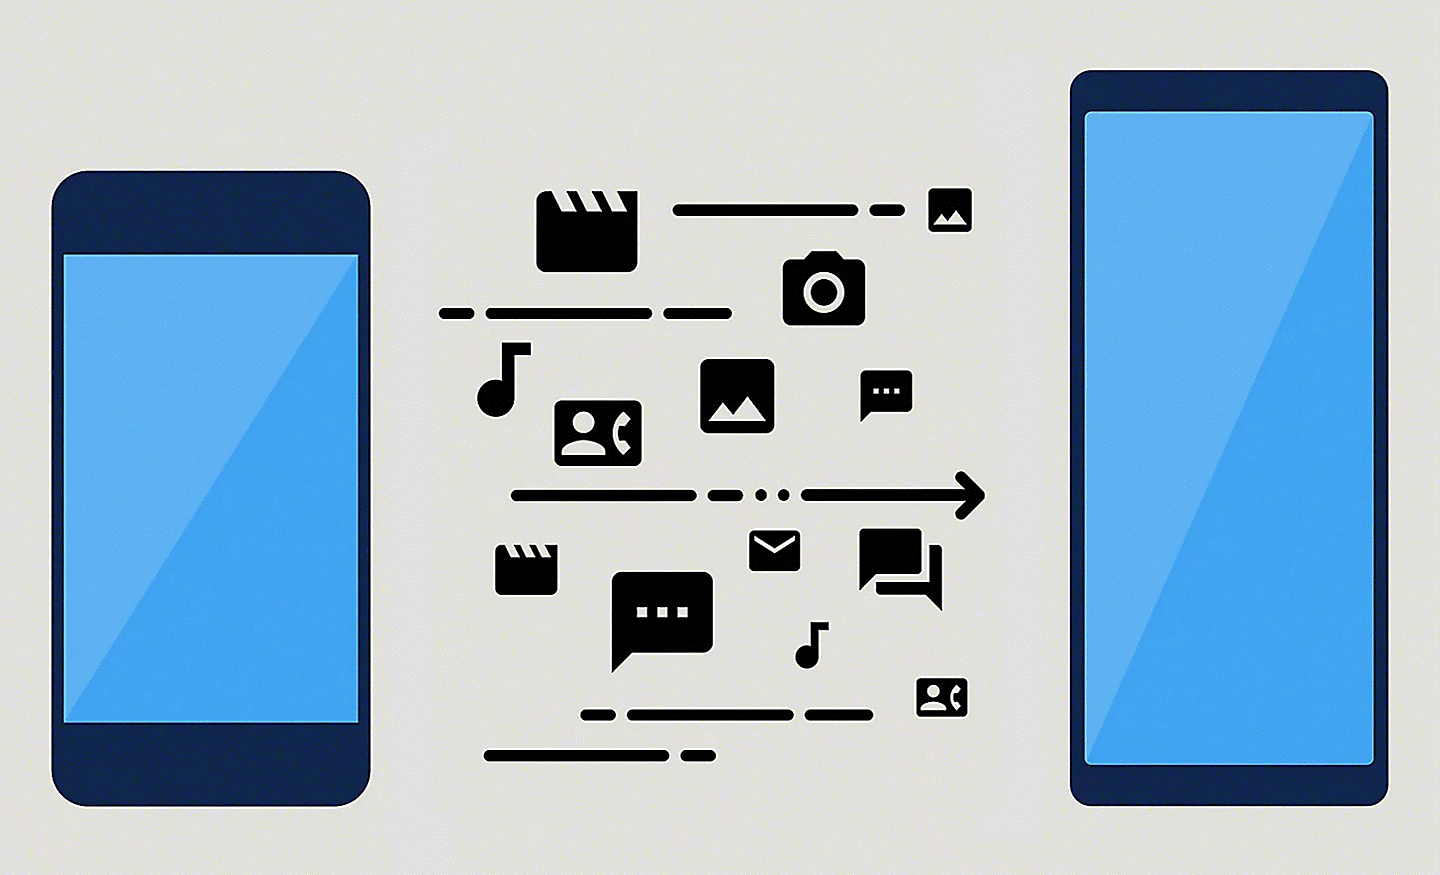 Diagram of two phones with numerous icons and arrows moving from the left phone to the right one